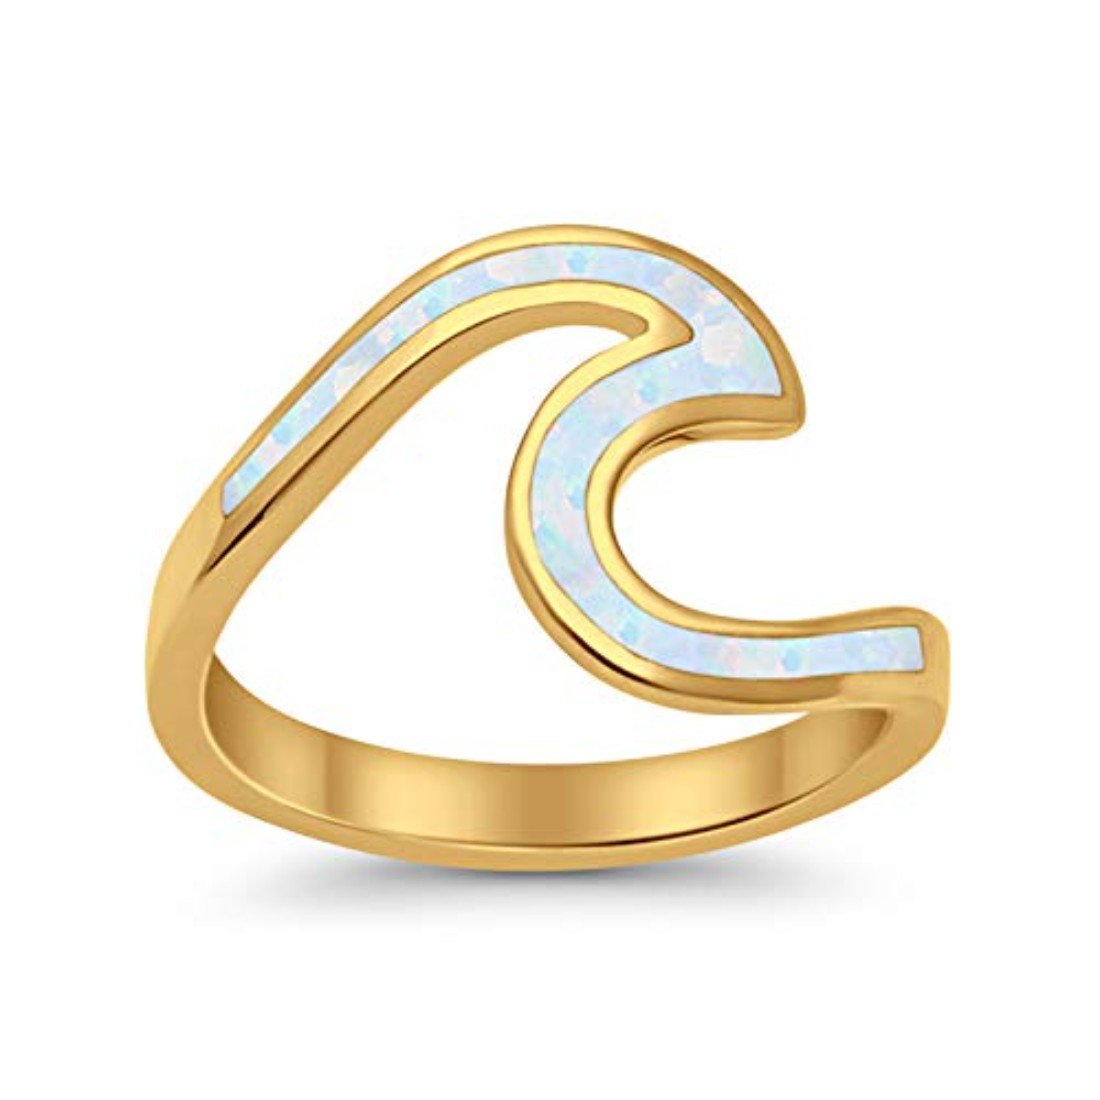 Wave Ring Band Swirl Yellow Tone, Lab Created White Opal 925 Sterling Silver